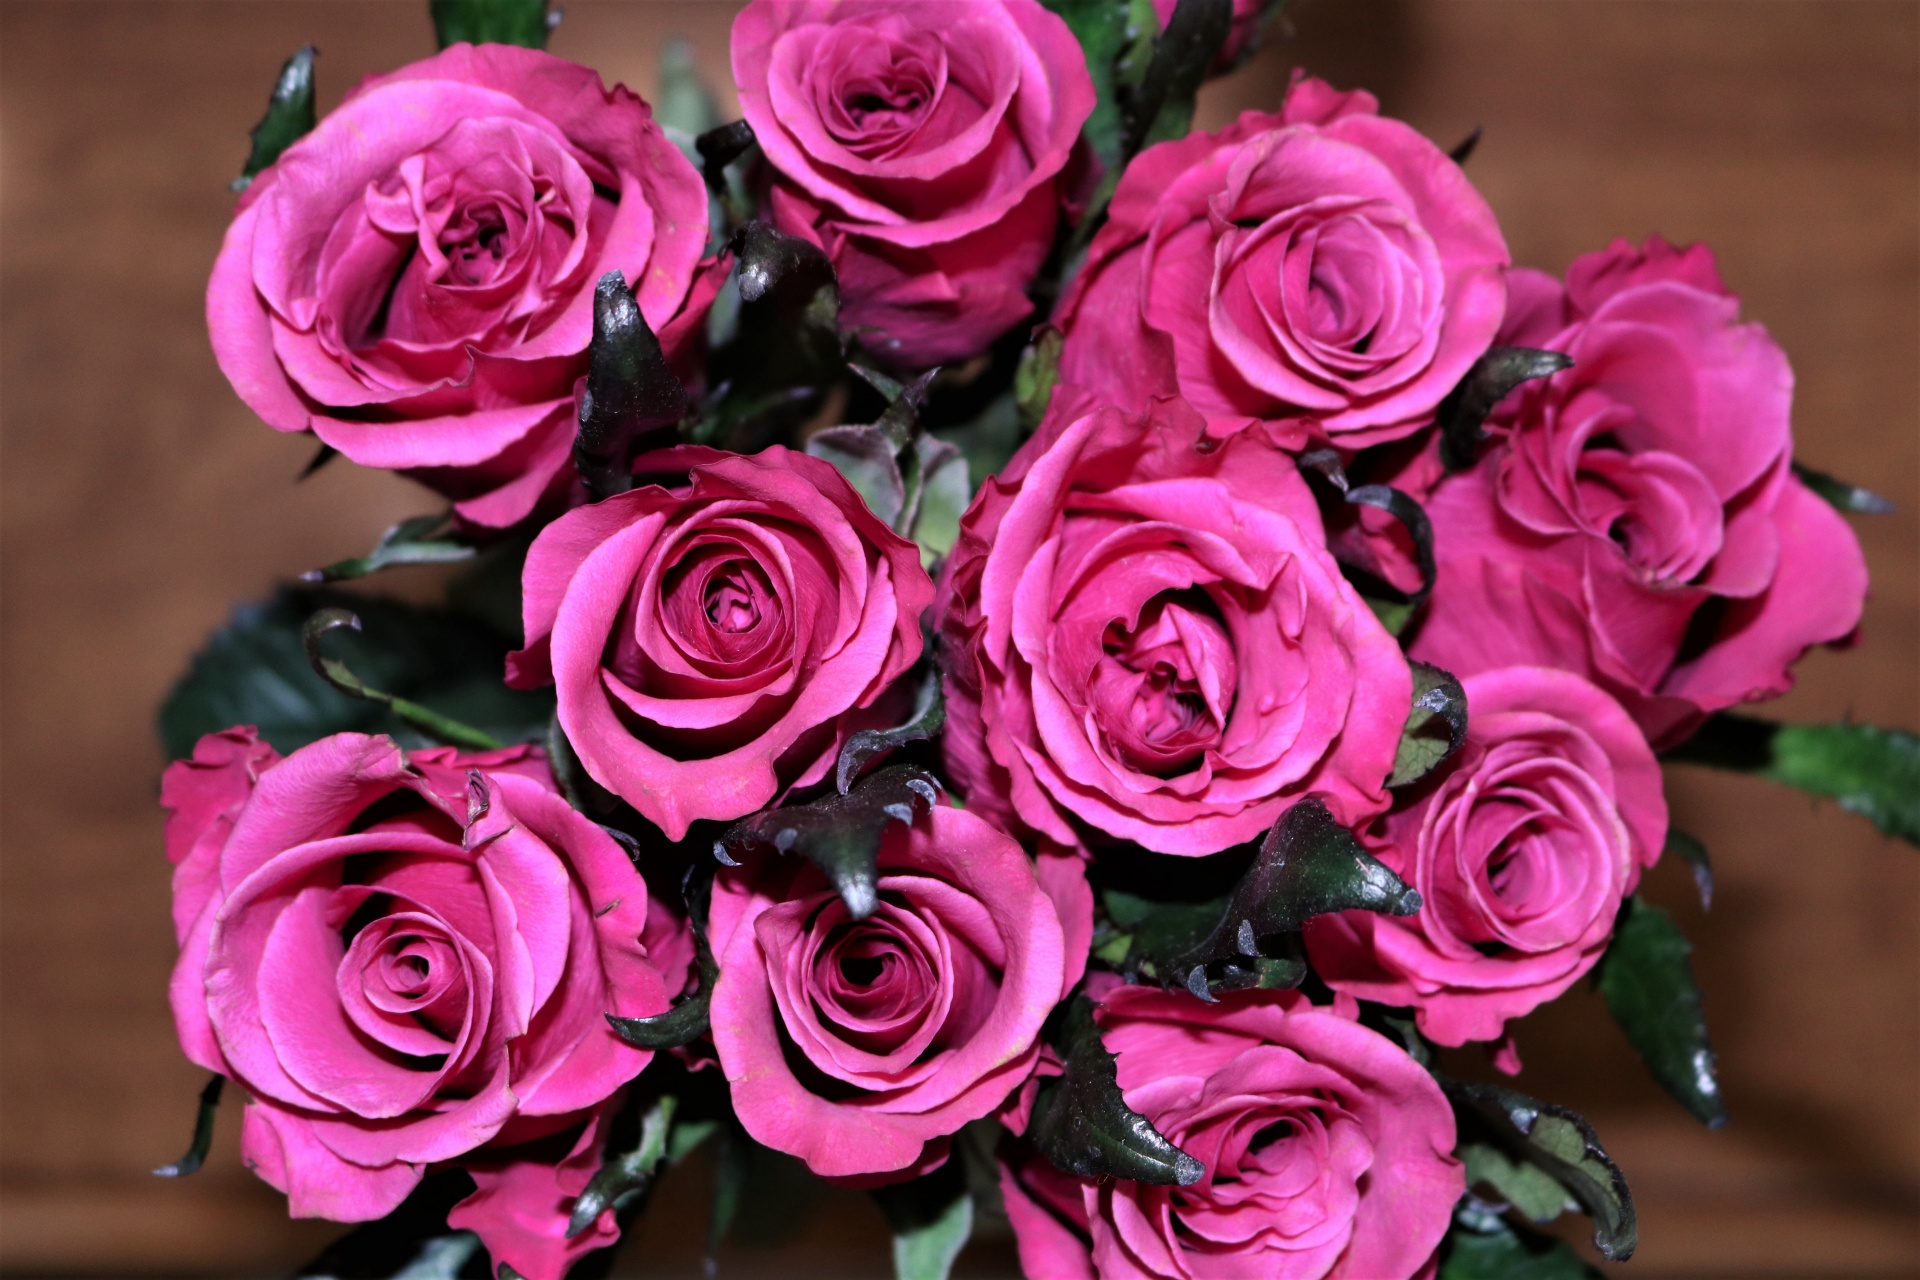 Top View Of A Bouquet Of Pink Roses